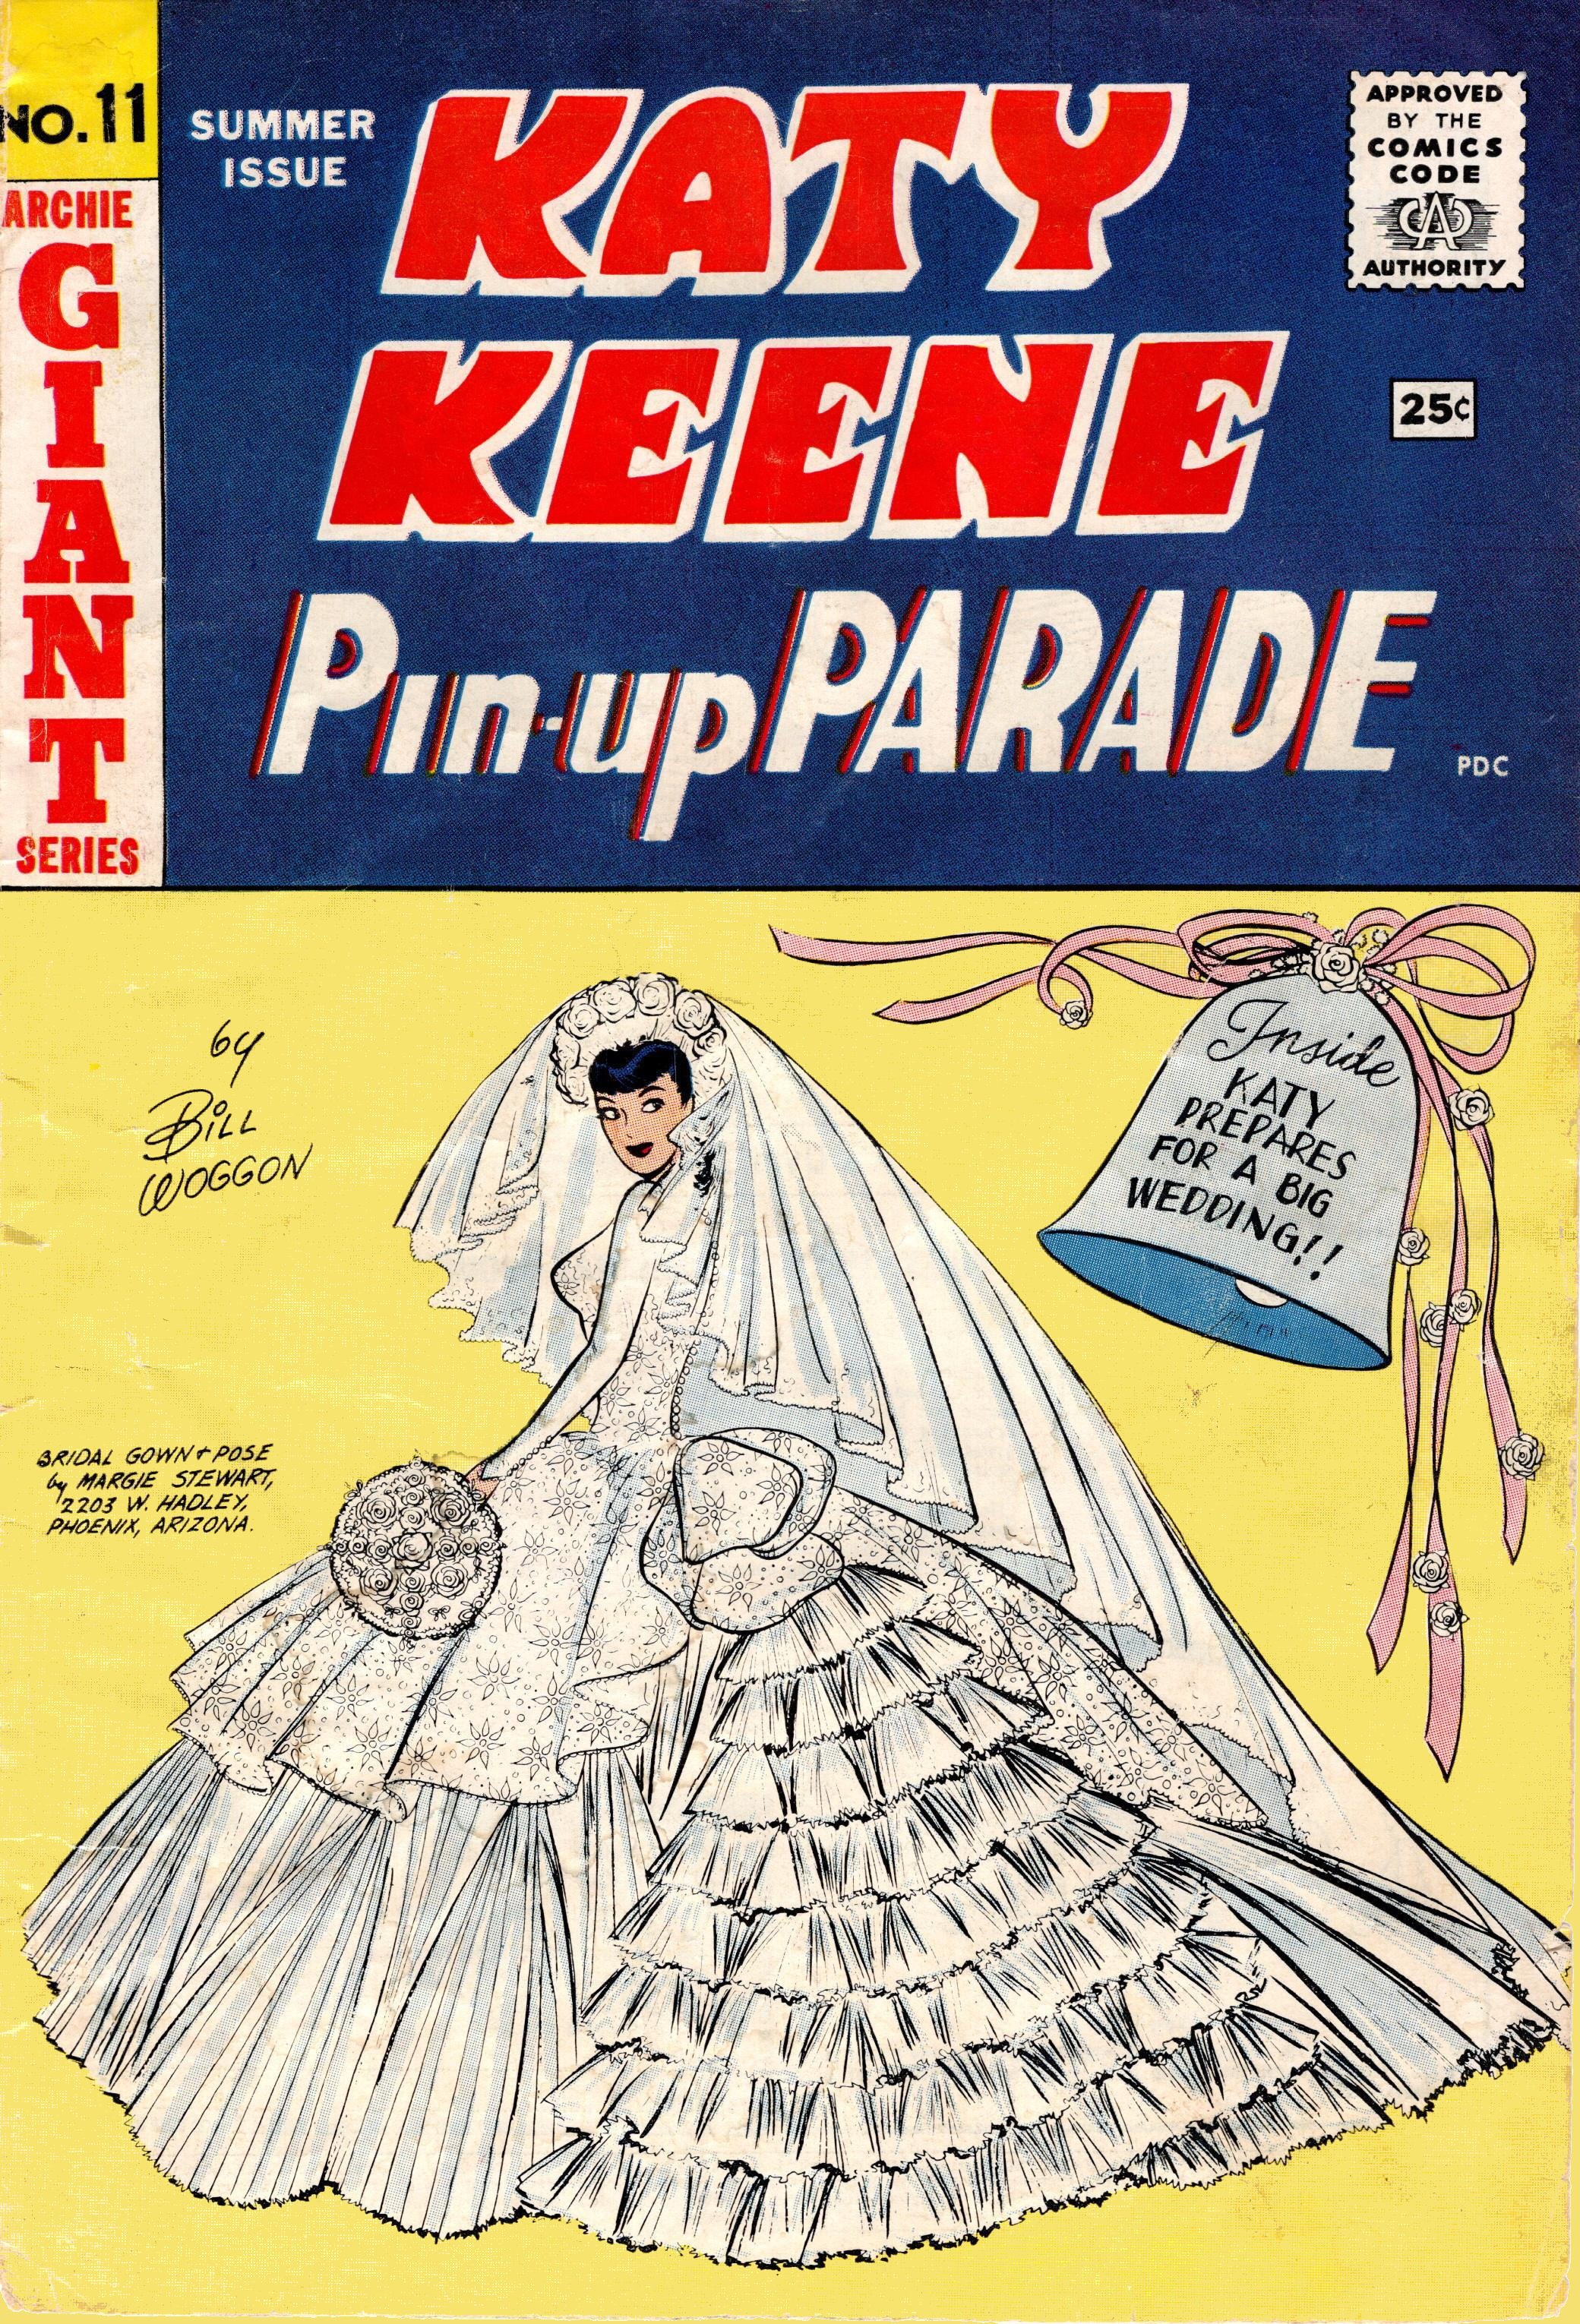 Read online Katy Keene Pin-up Parade comic -  Issue #11 - 1